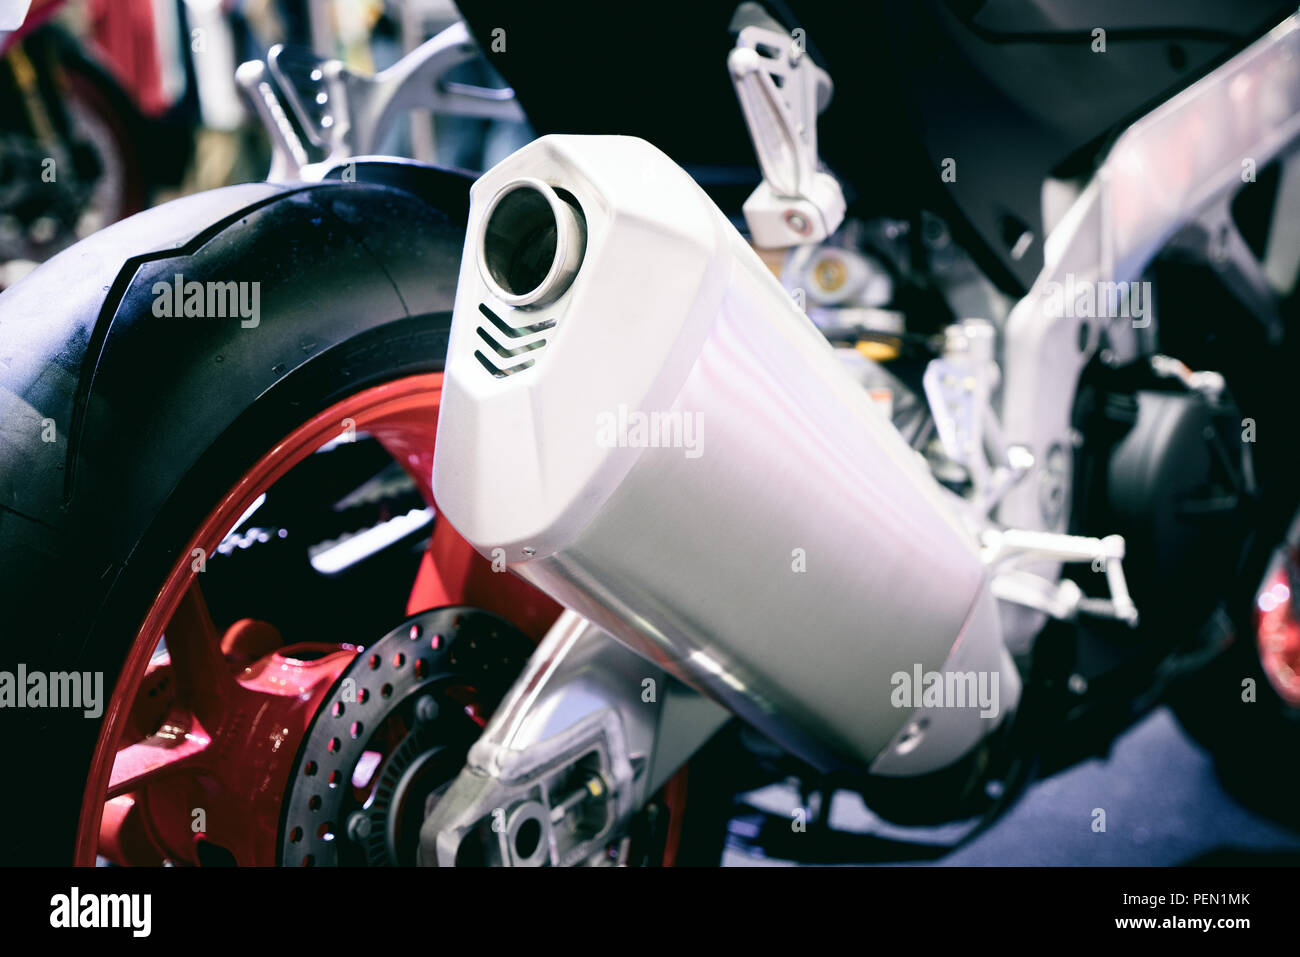 Closeup of exhaust or intake of racing motorcycle. Low angle photograph of motorcycle. Stock Photo